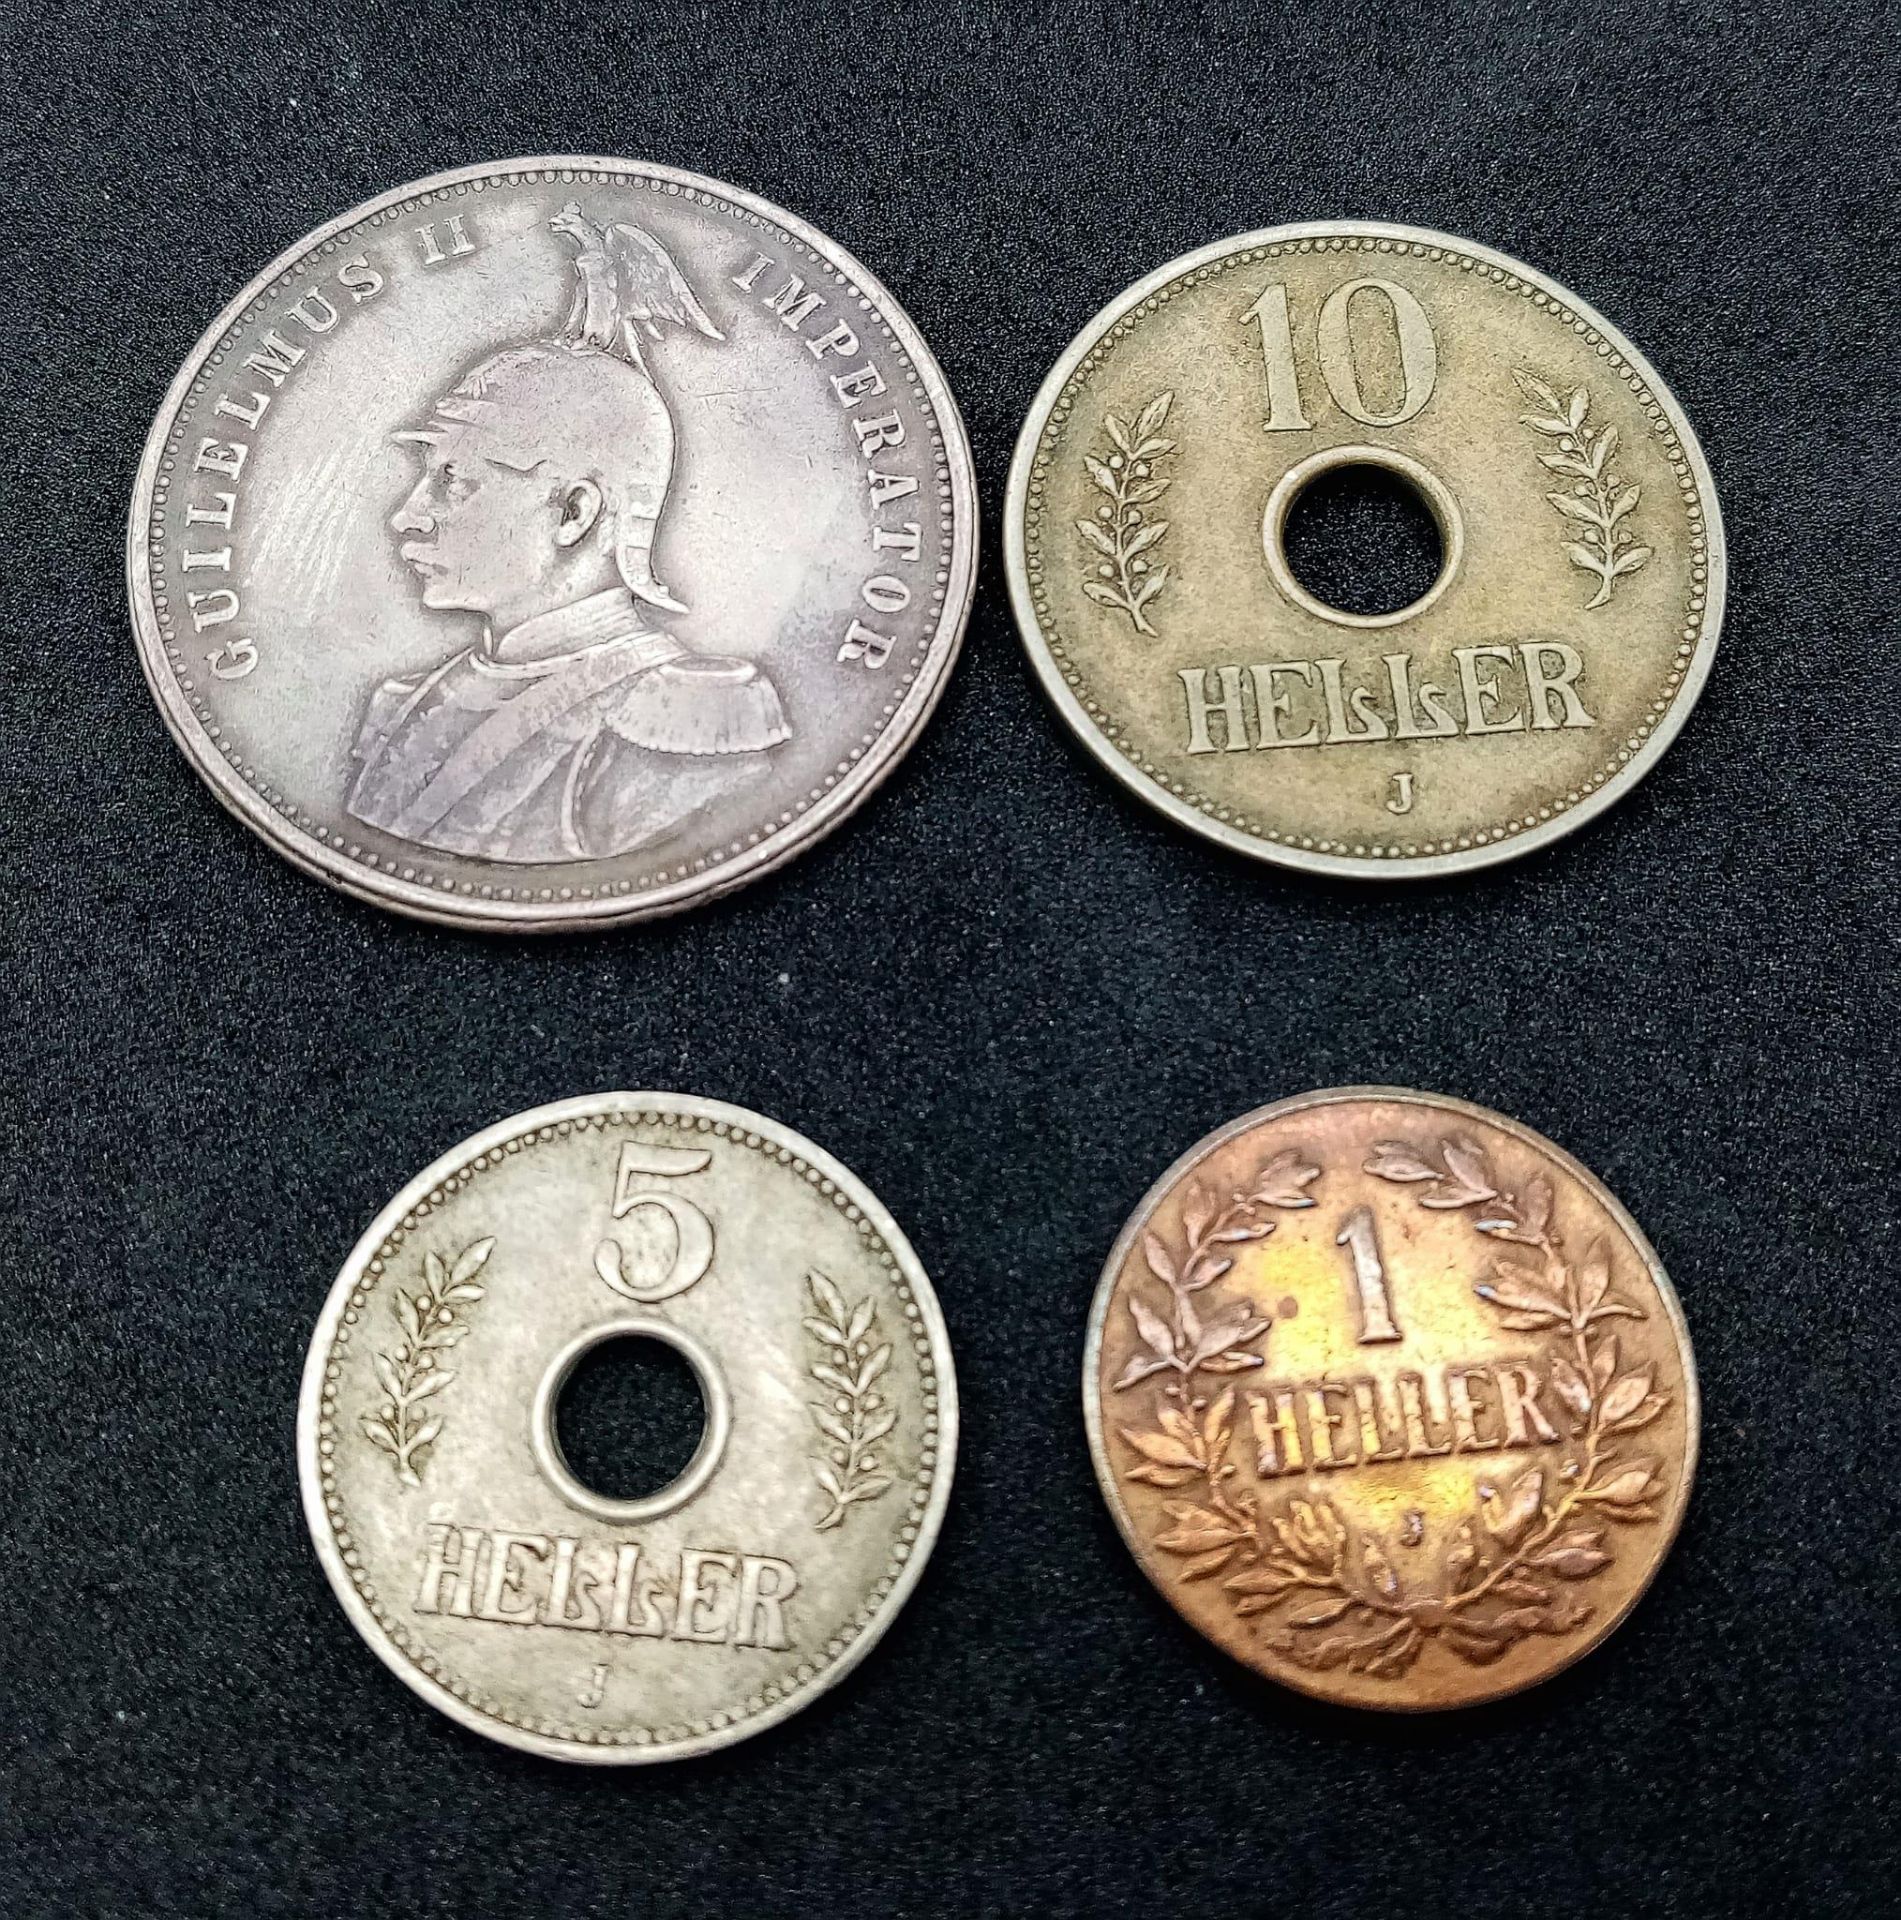 Four Antique East African German Coins - Silver One Rupie, 1910 10 heller, 1914 5 heller and a - Image 3 of 3